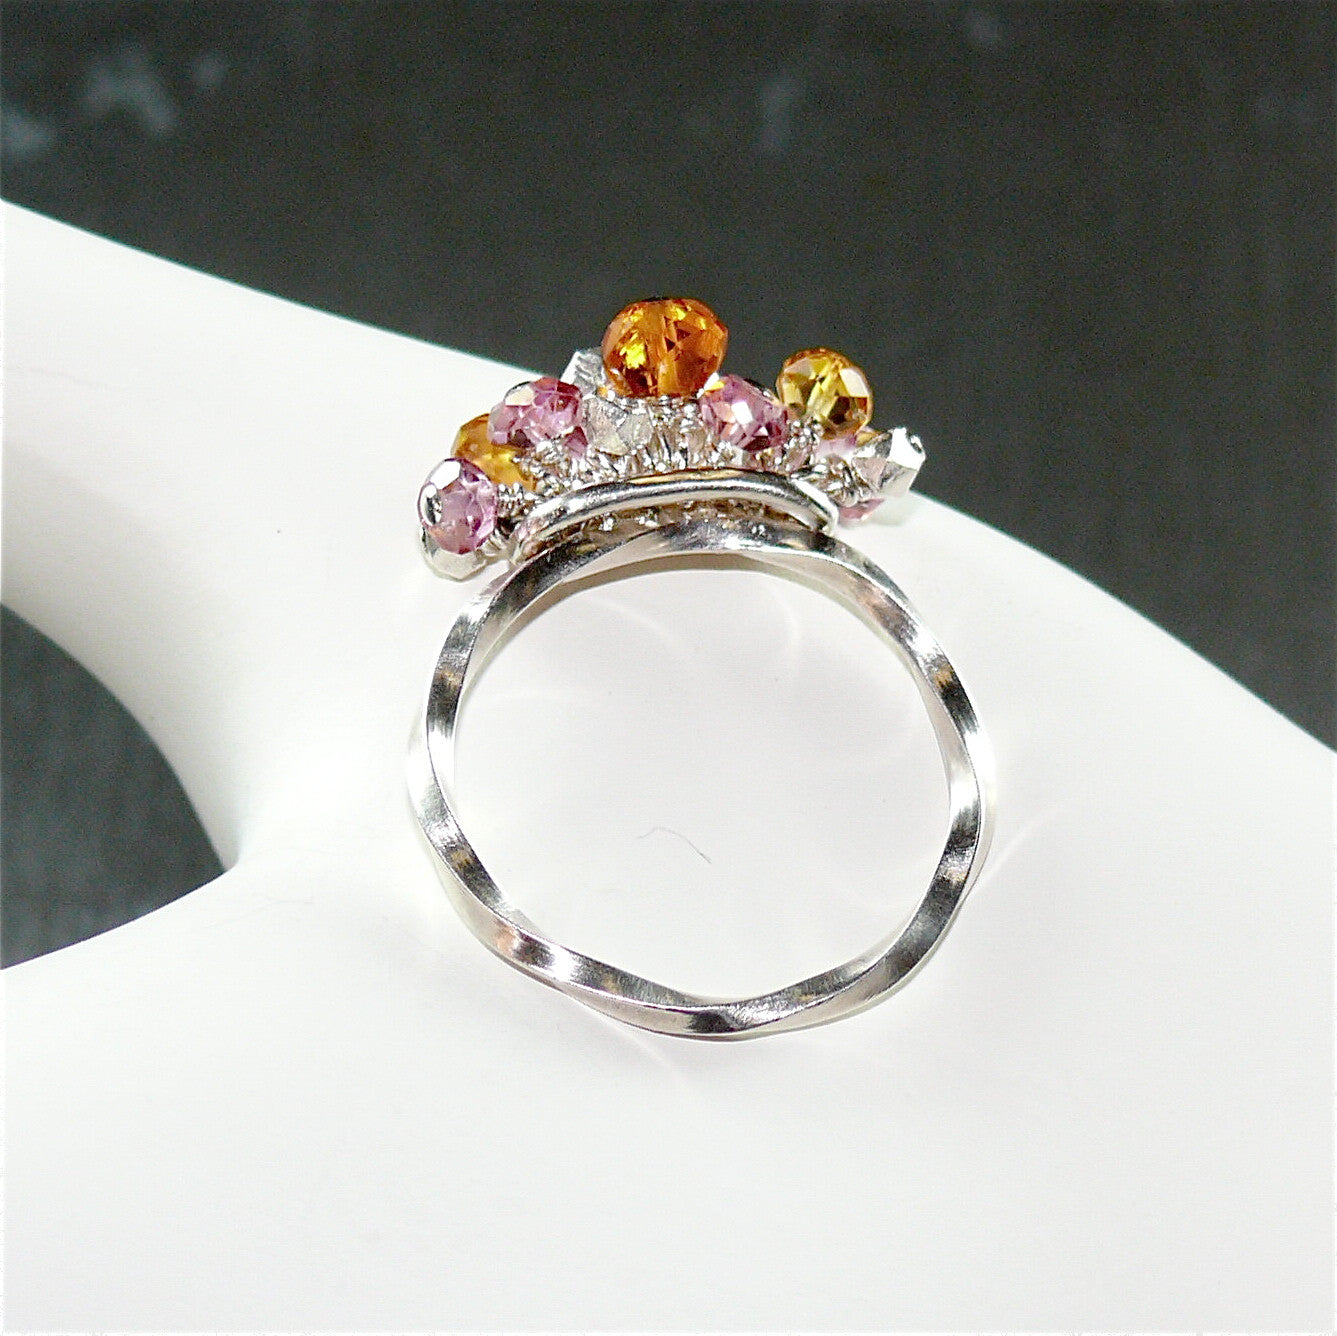 Handcrafted Gemstone Confetti Ring by Arpaia Lang - Twisted Sterling Silver with Citrine & Pink Topaz Faceted Briolette Beads